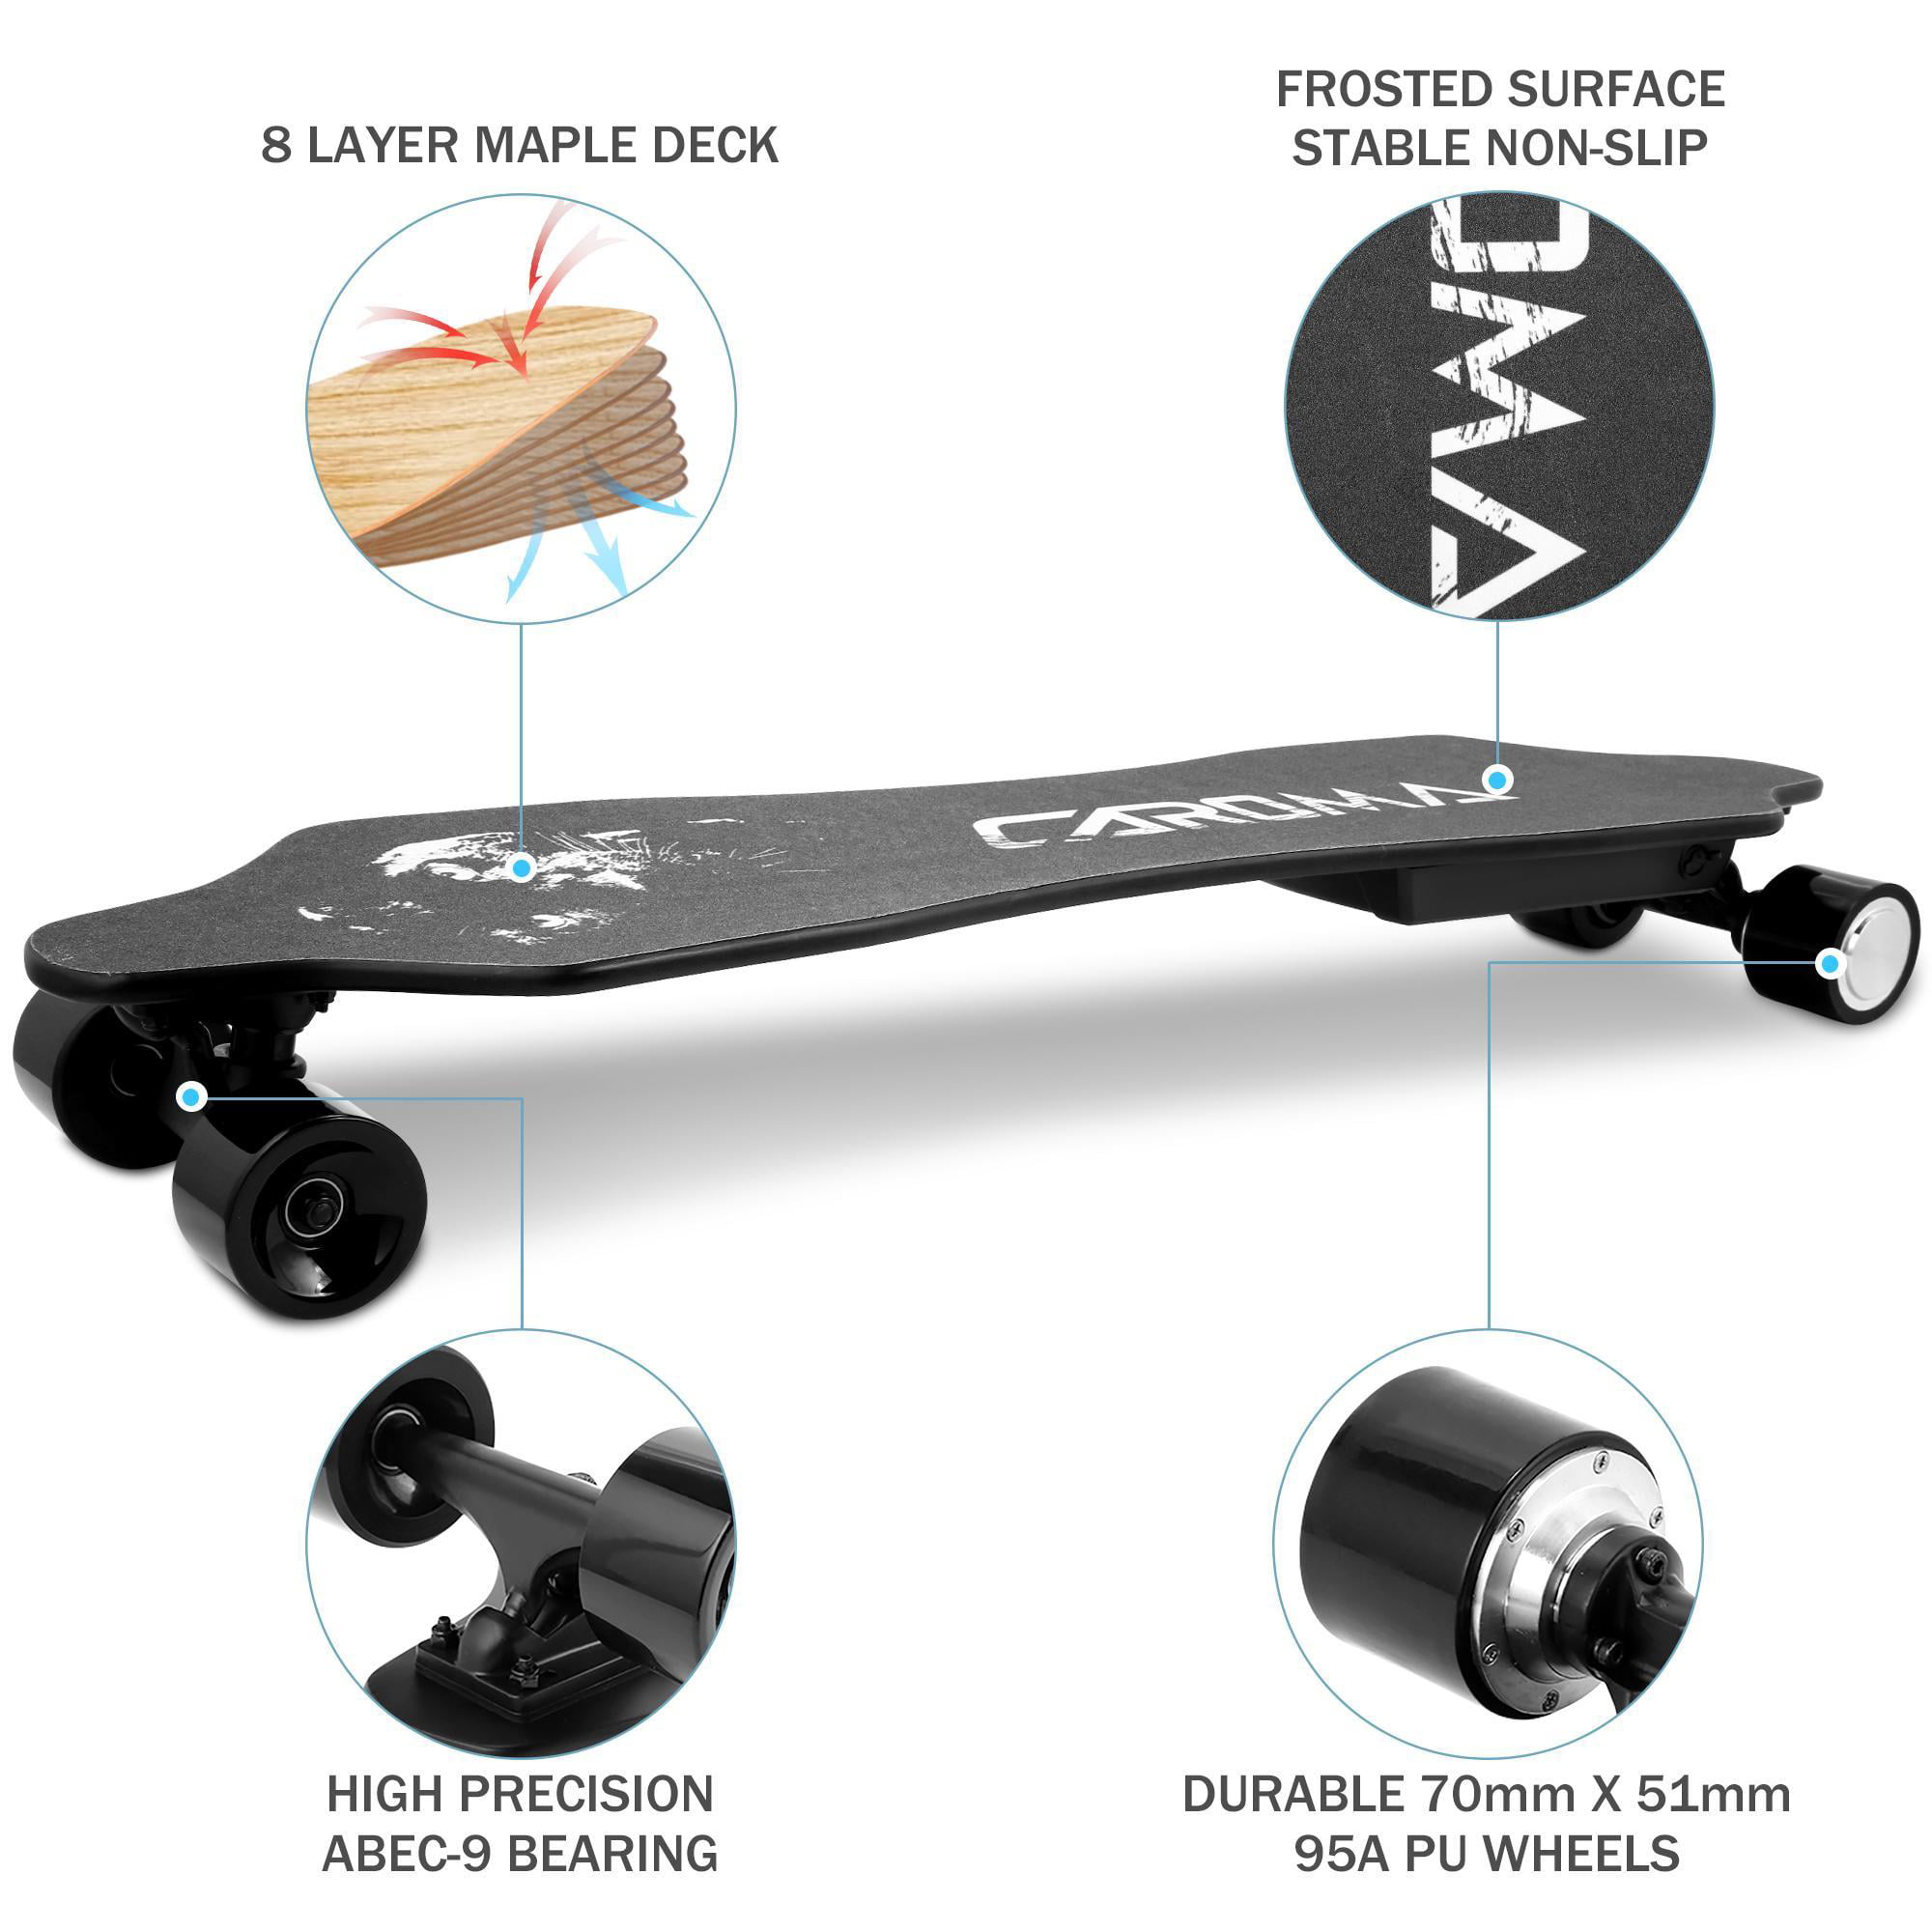 Details about   1* 2.4GHz Universal Remote Controller Suitable For Electric Skateboard Longboard 